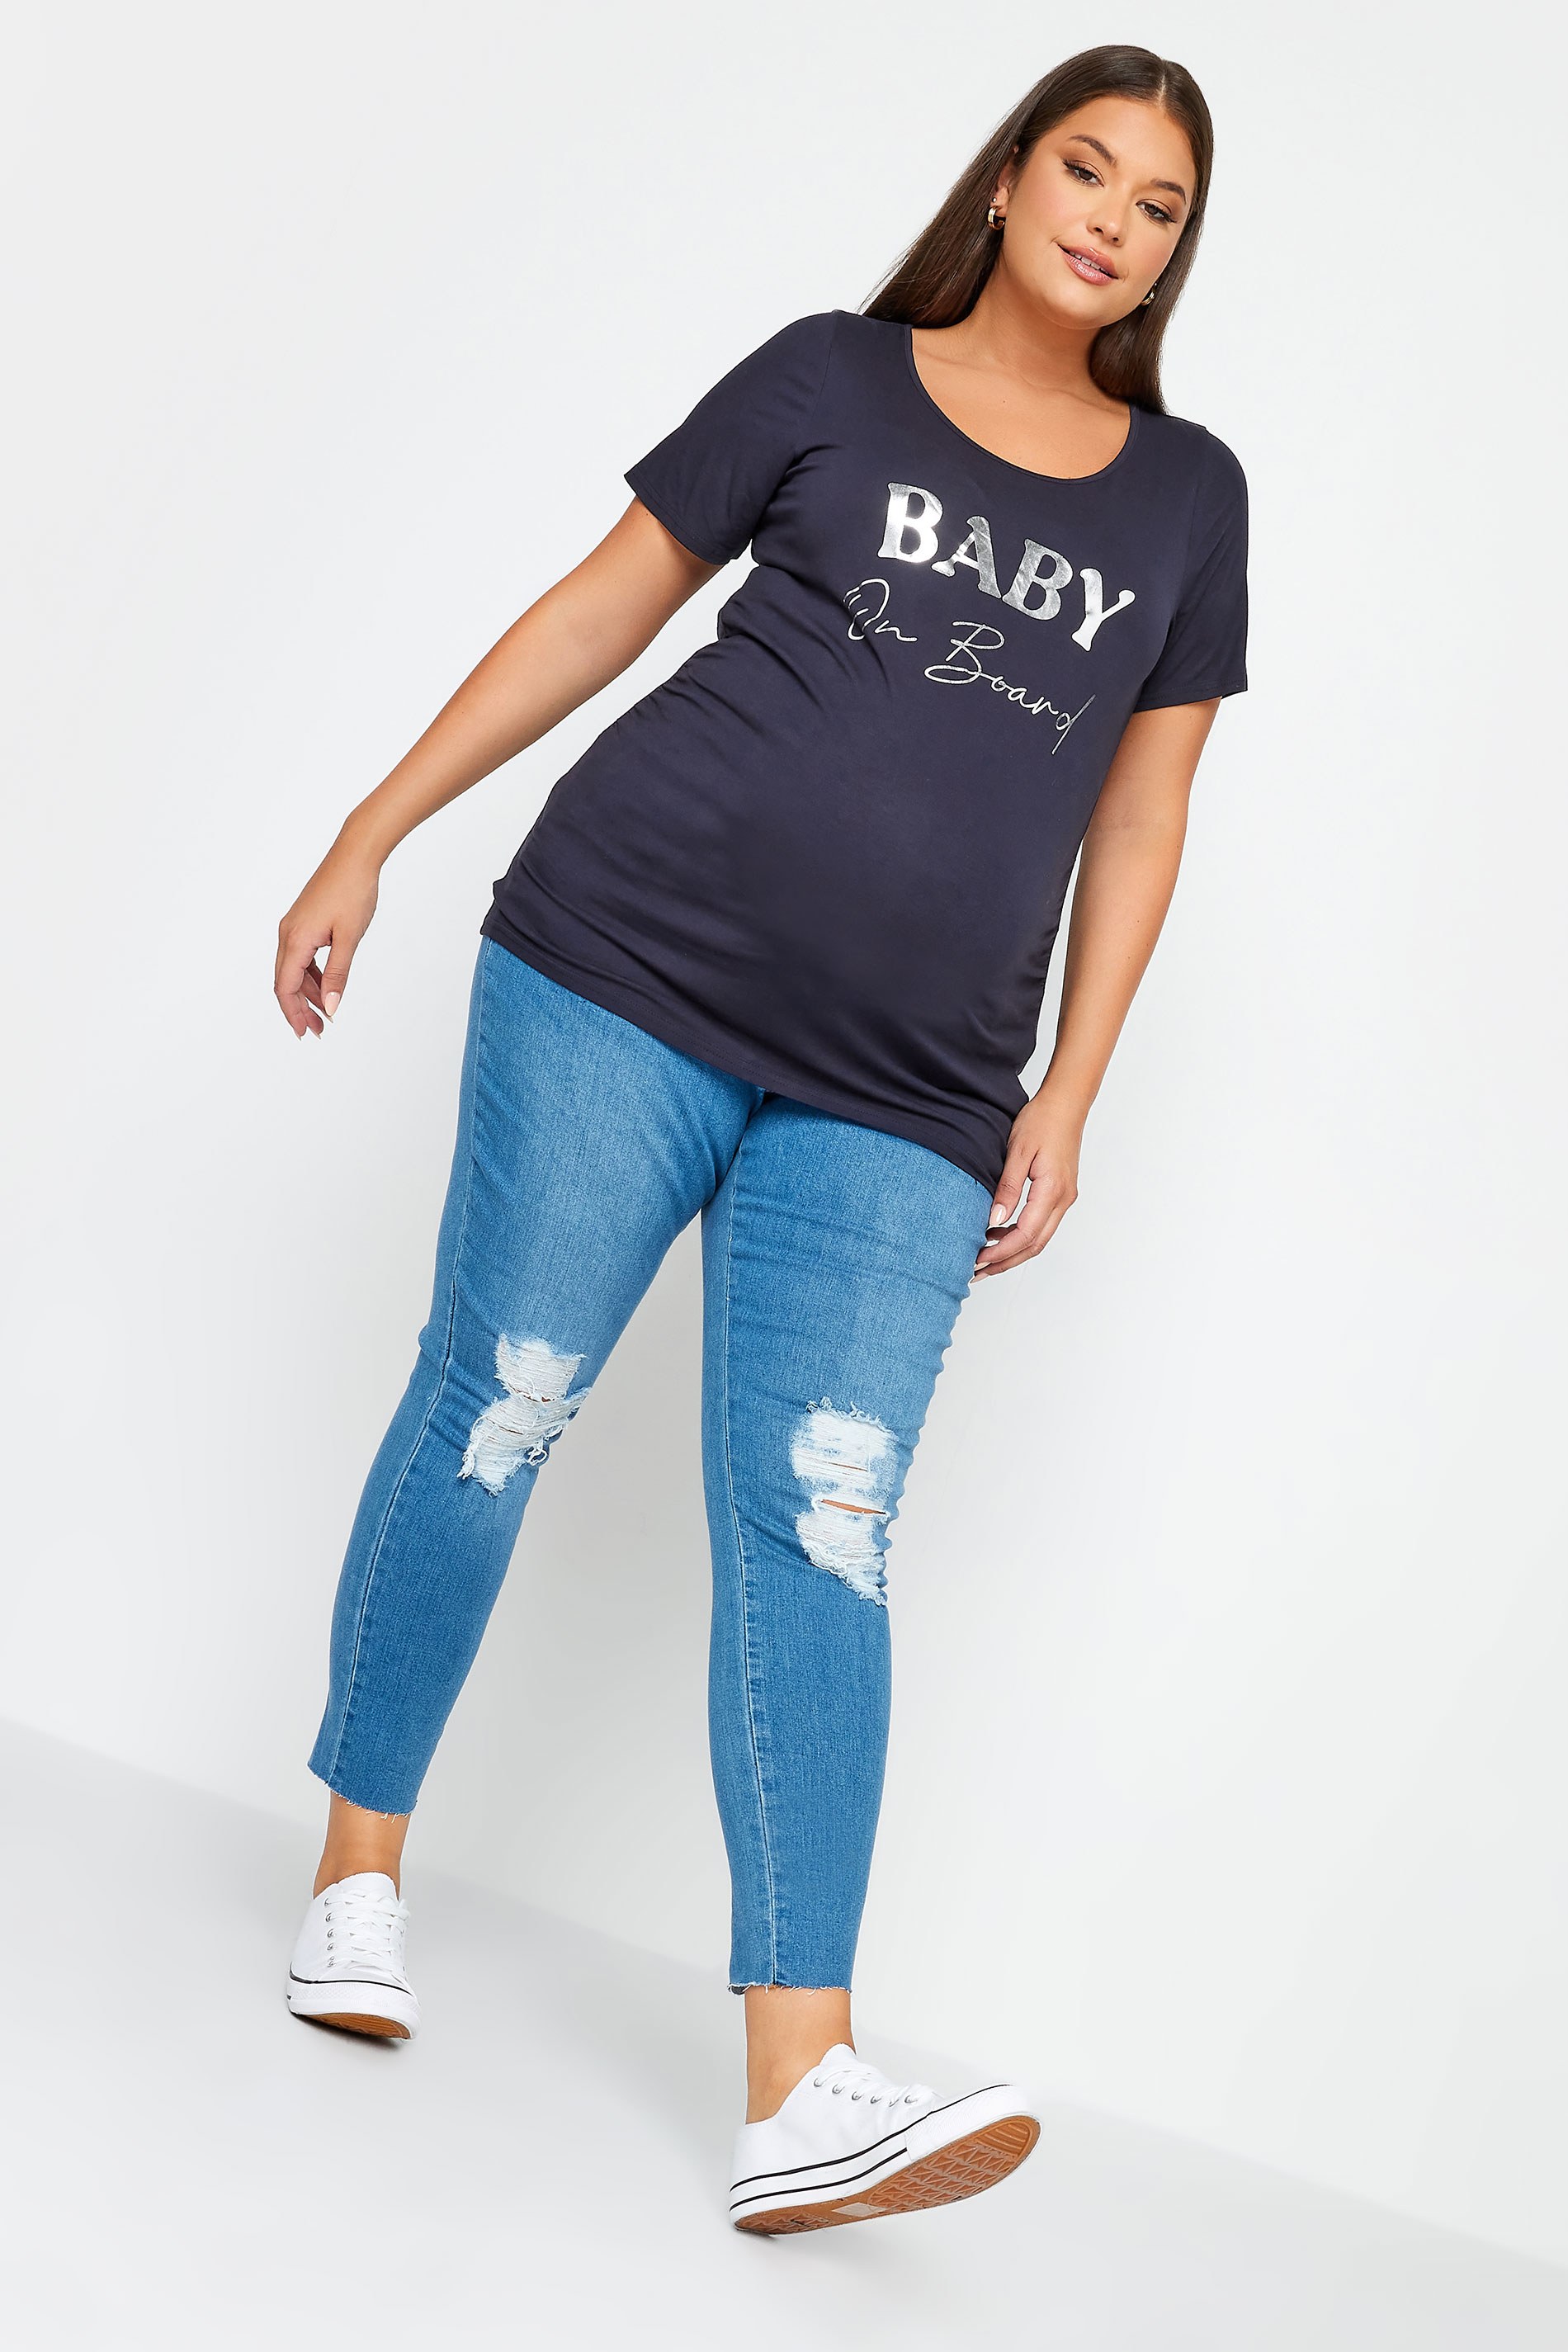 BUMP IT UP MATERNITY Plus Size Navy Blue 'Baby On Board' Slogan T-shirt | Yours Clothing 1